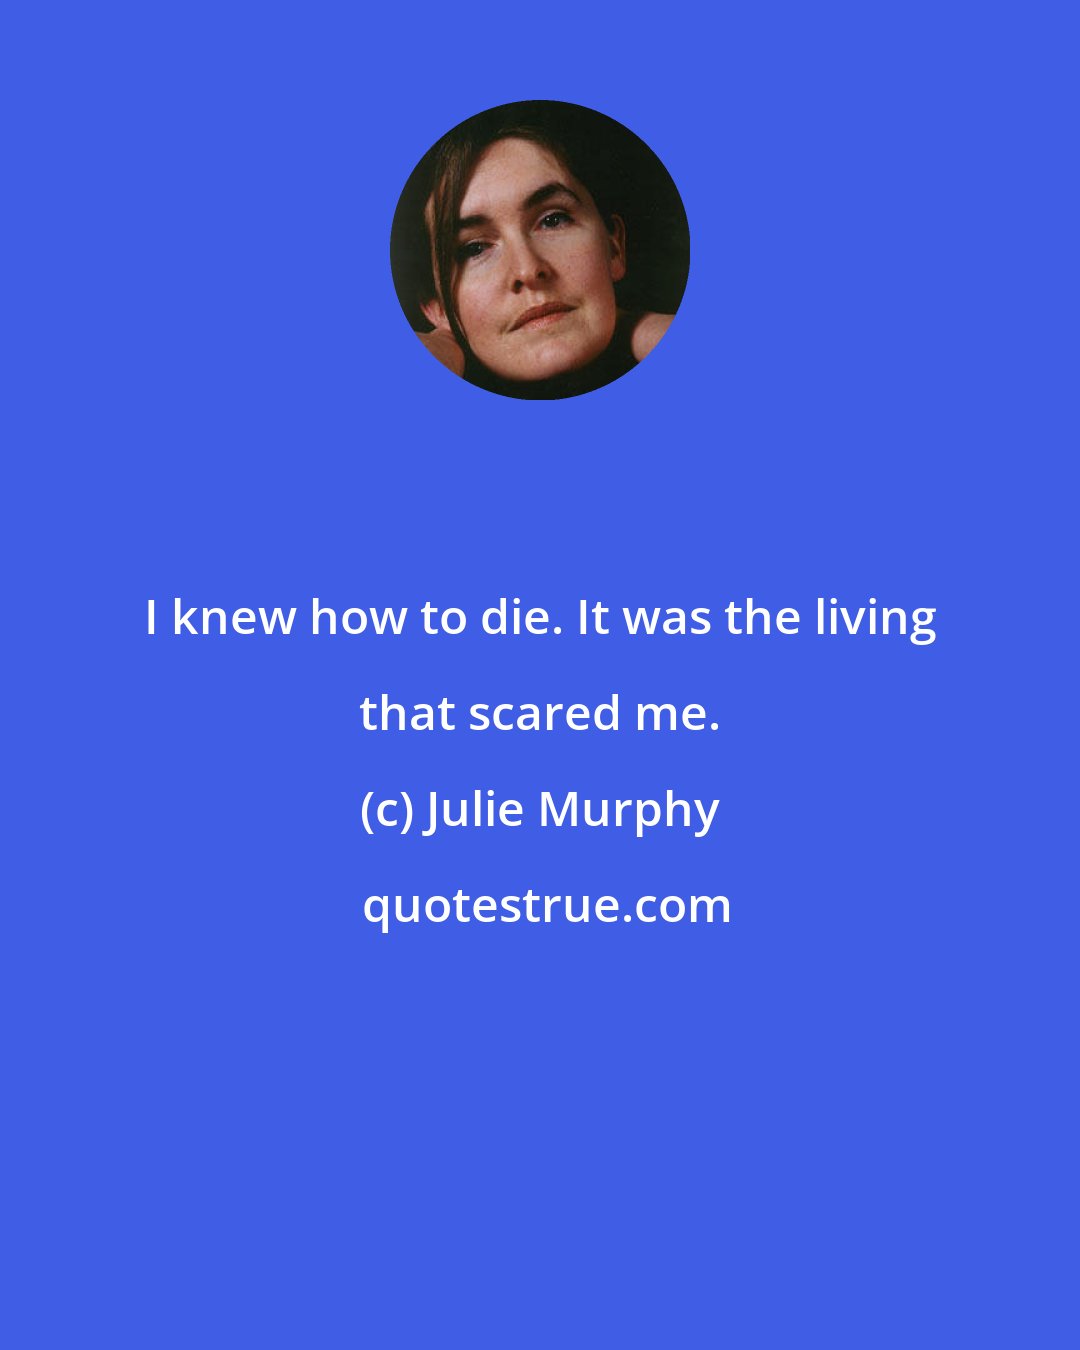 Julie Murphy: I knew how to die. It was the living that scared me.